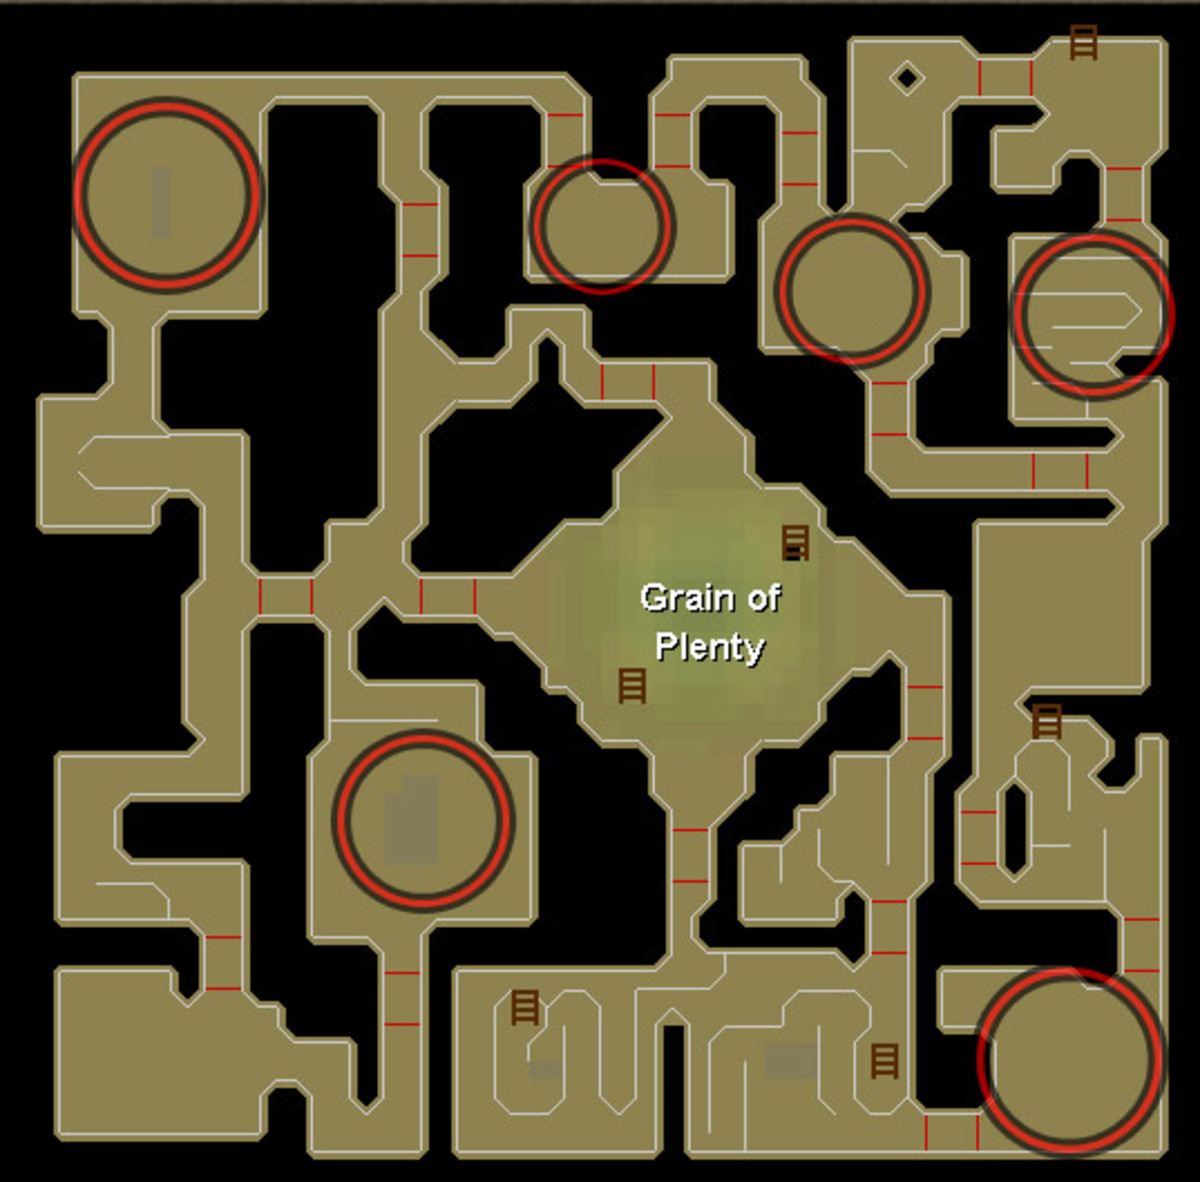 The locations of Flesh Crawlers.